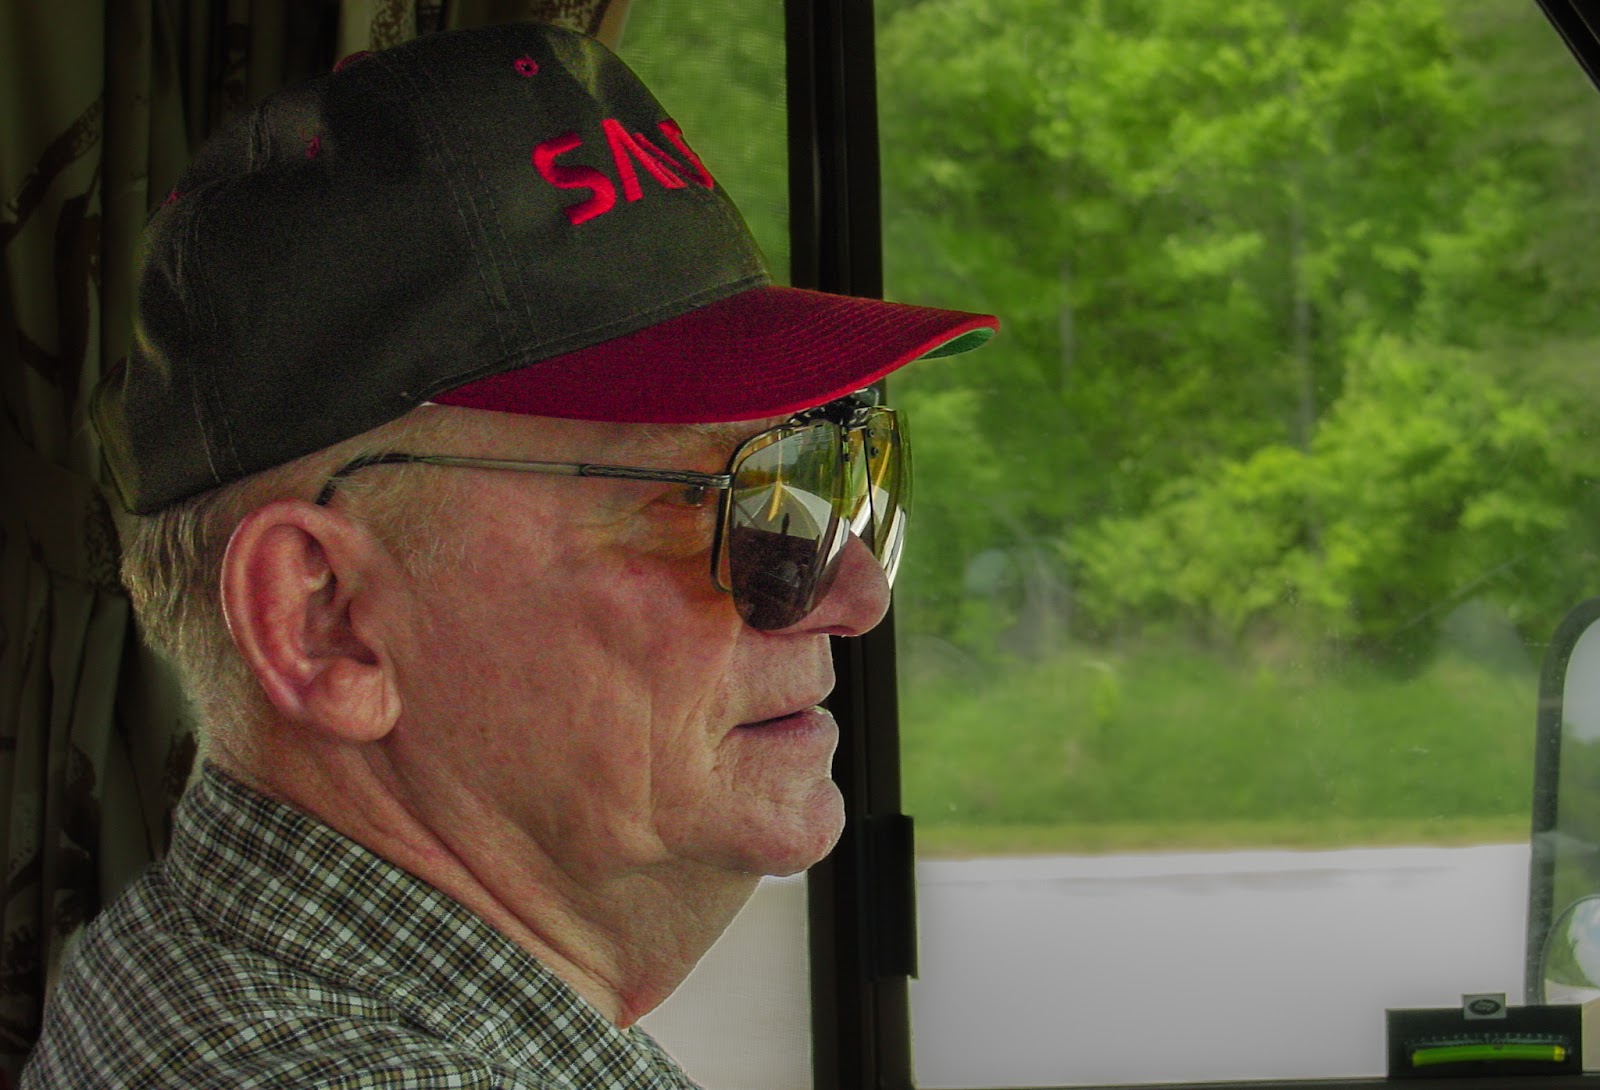 Man wearing cap and glasses, driving a large vehicle. 